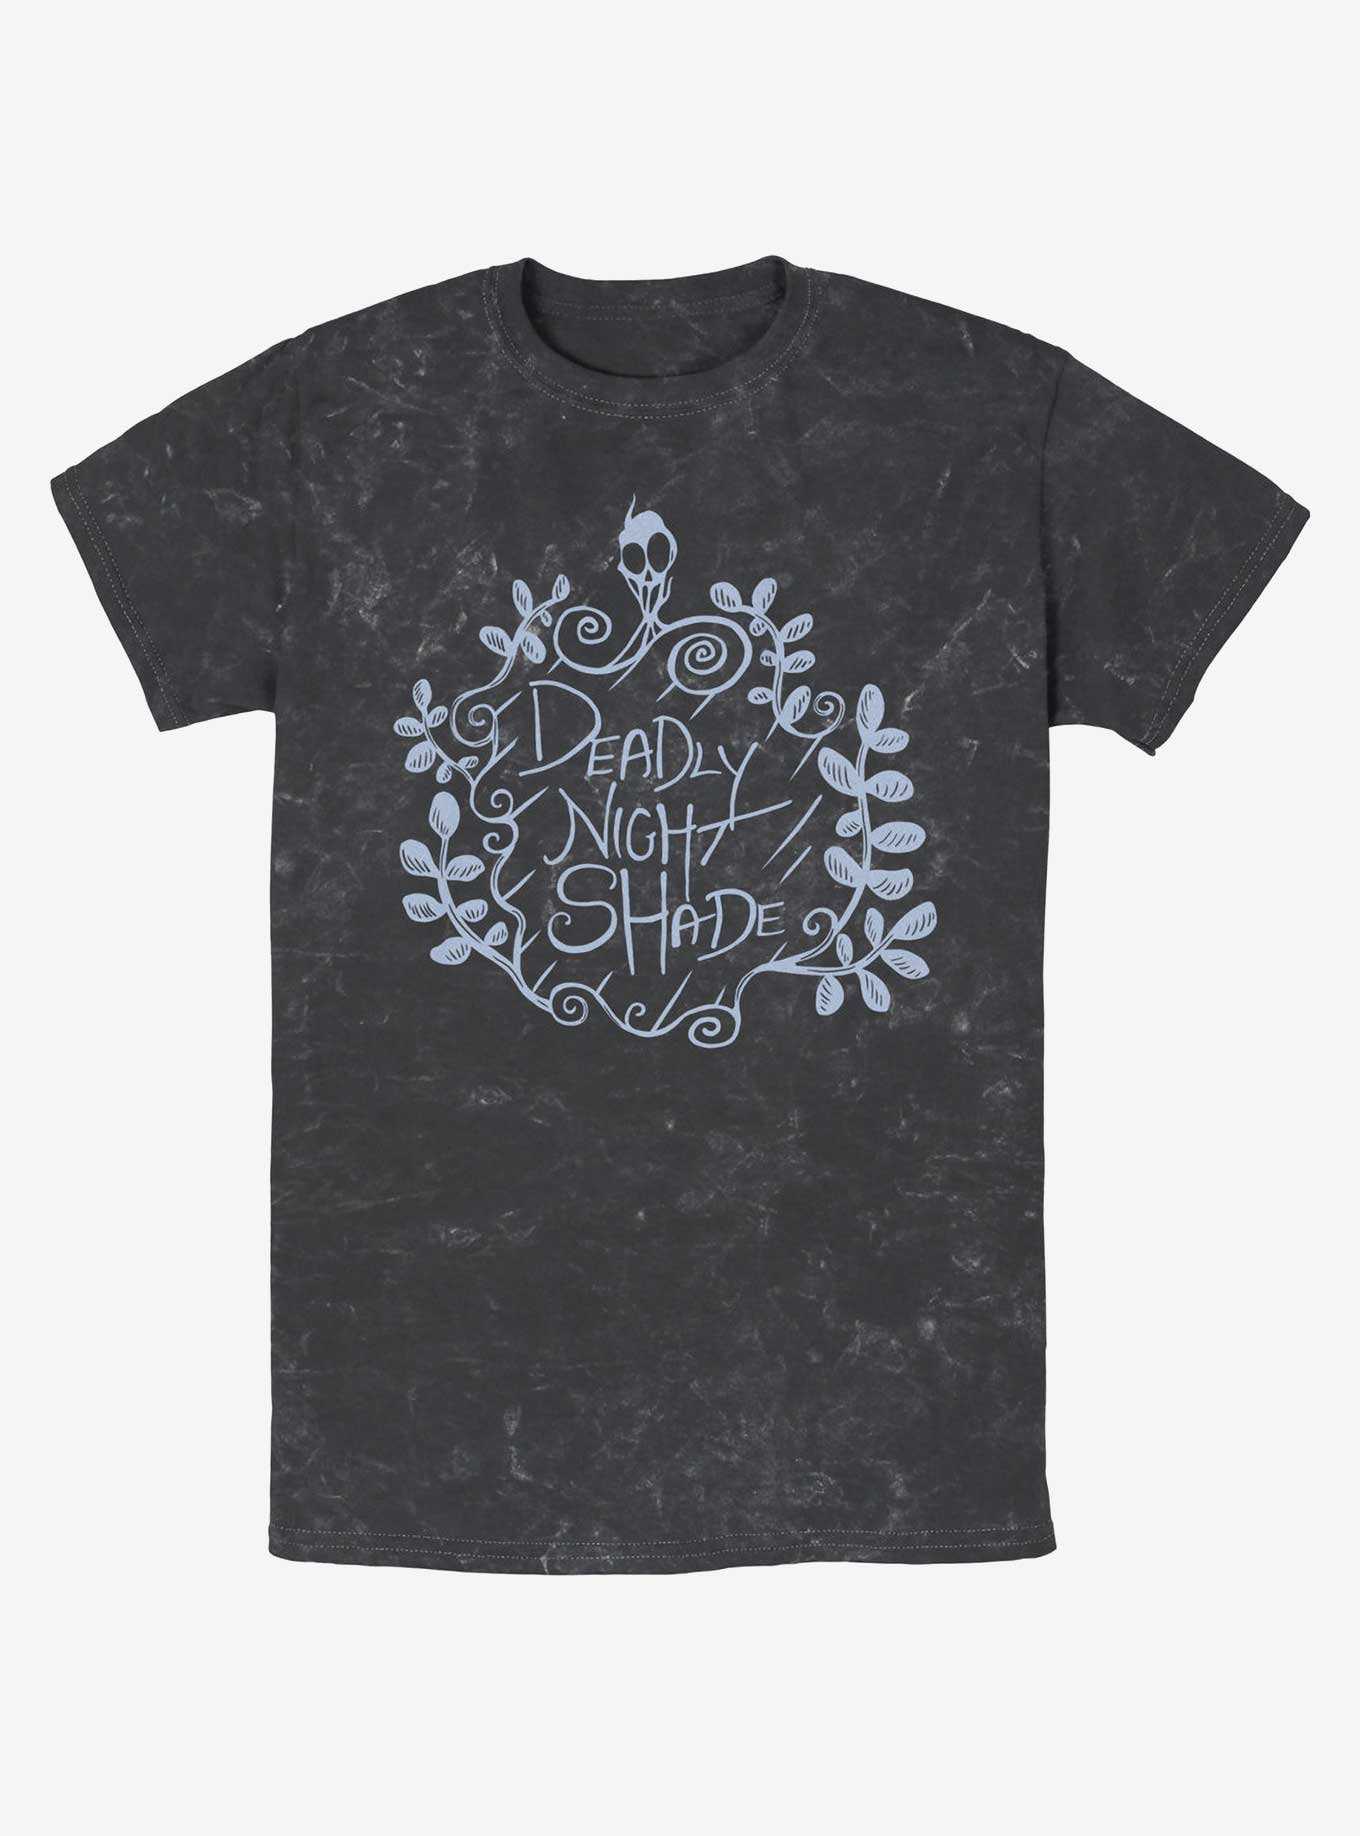 Disney The Nightmare Before Christmas Deadly Night Shade Mineral Wash T-Shirt, , hi-res